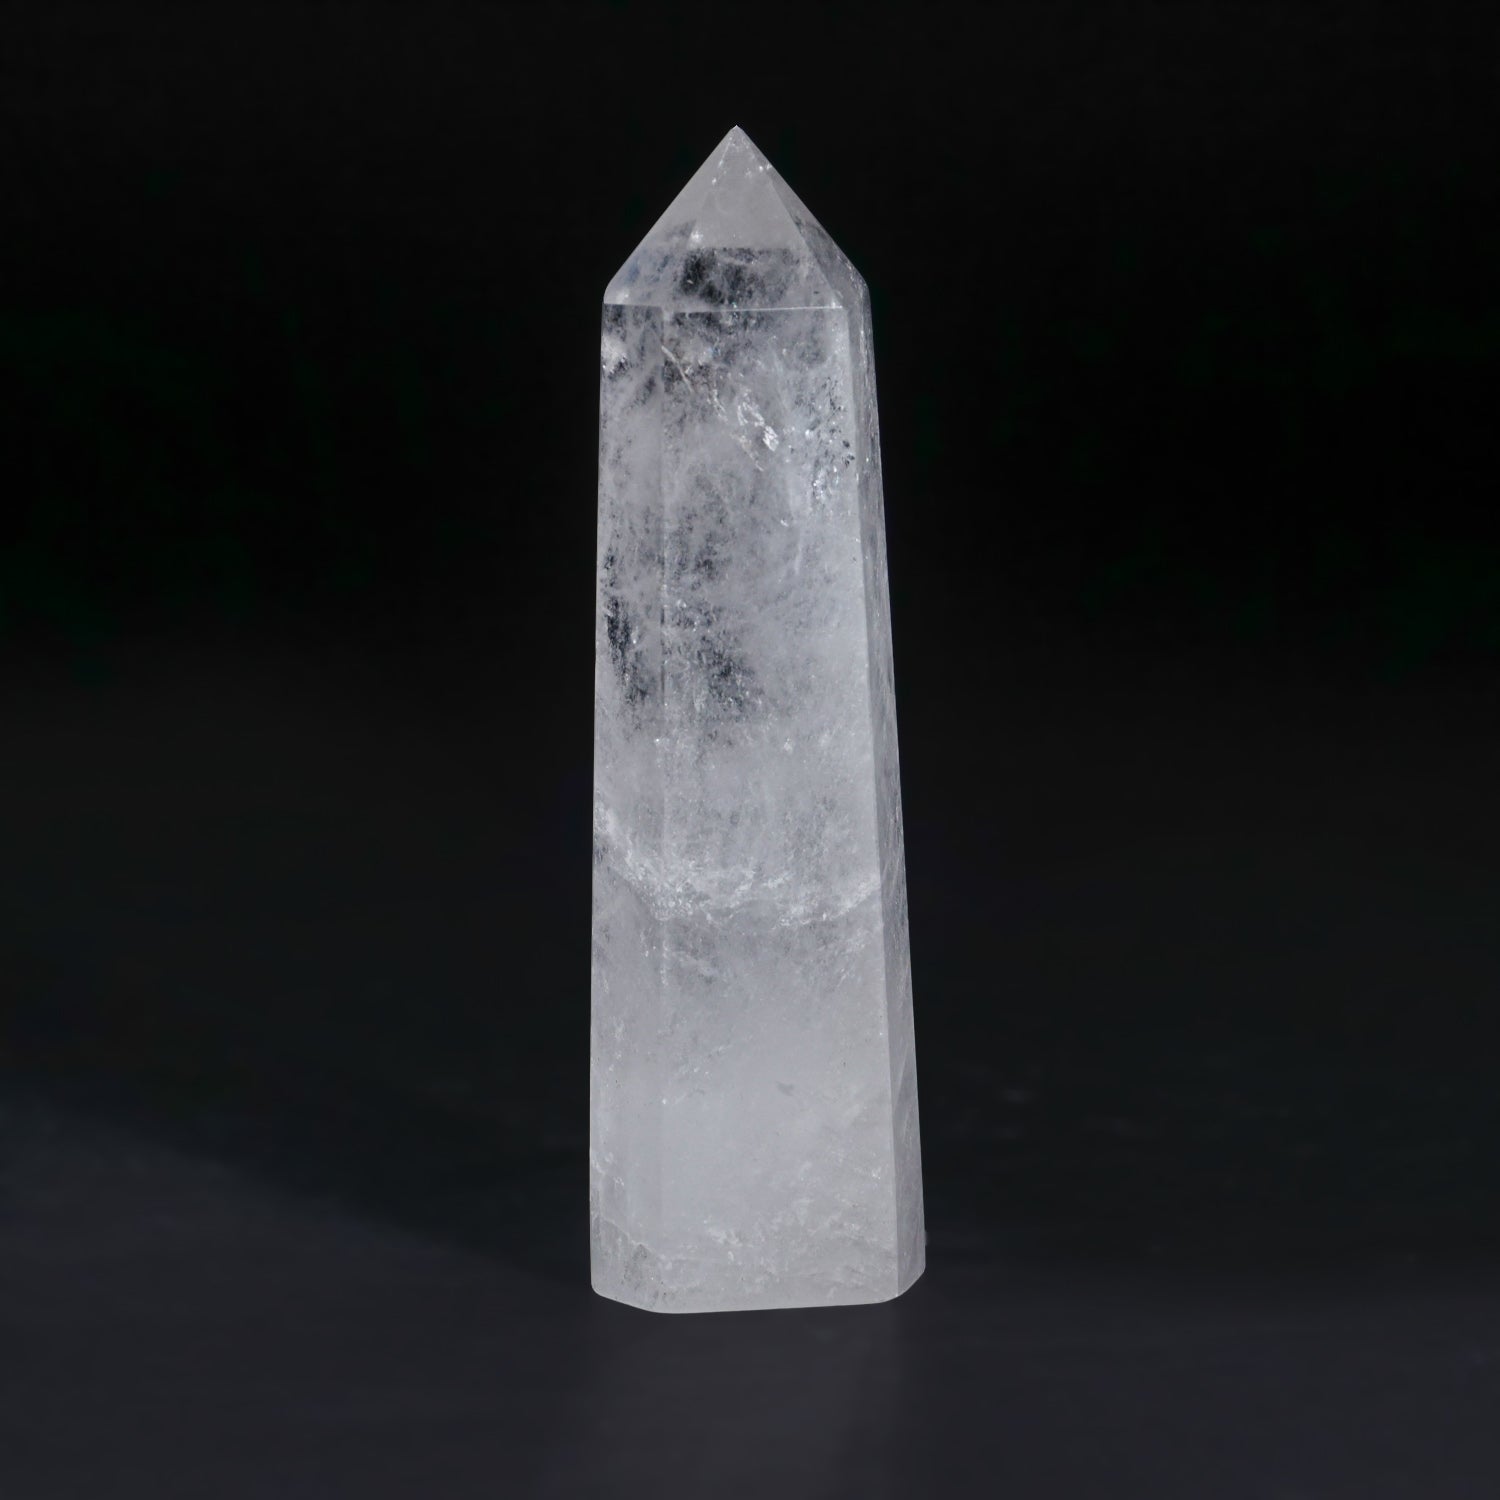 Genuine Polished Clear Quartz Point From Brazil (280 grams)